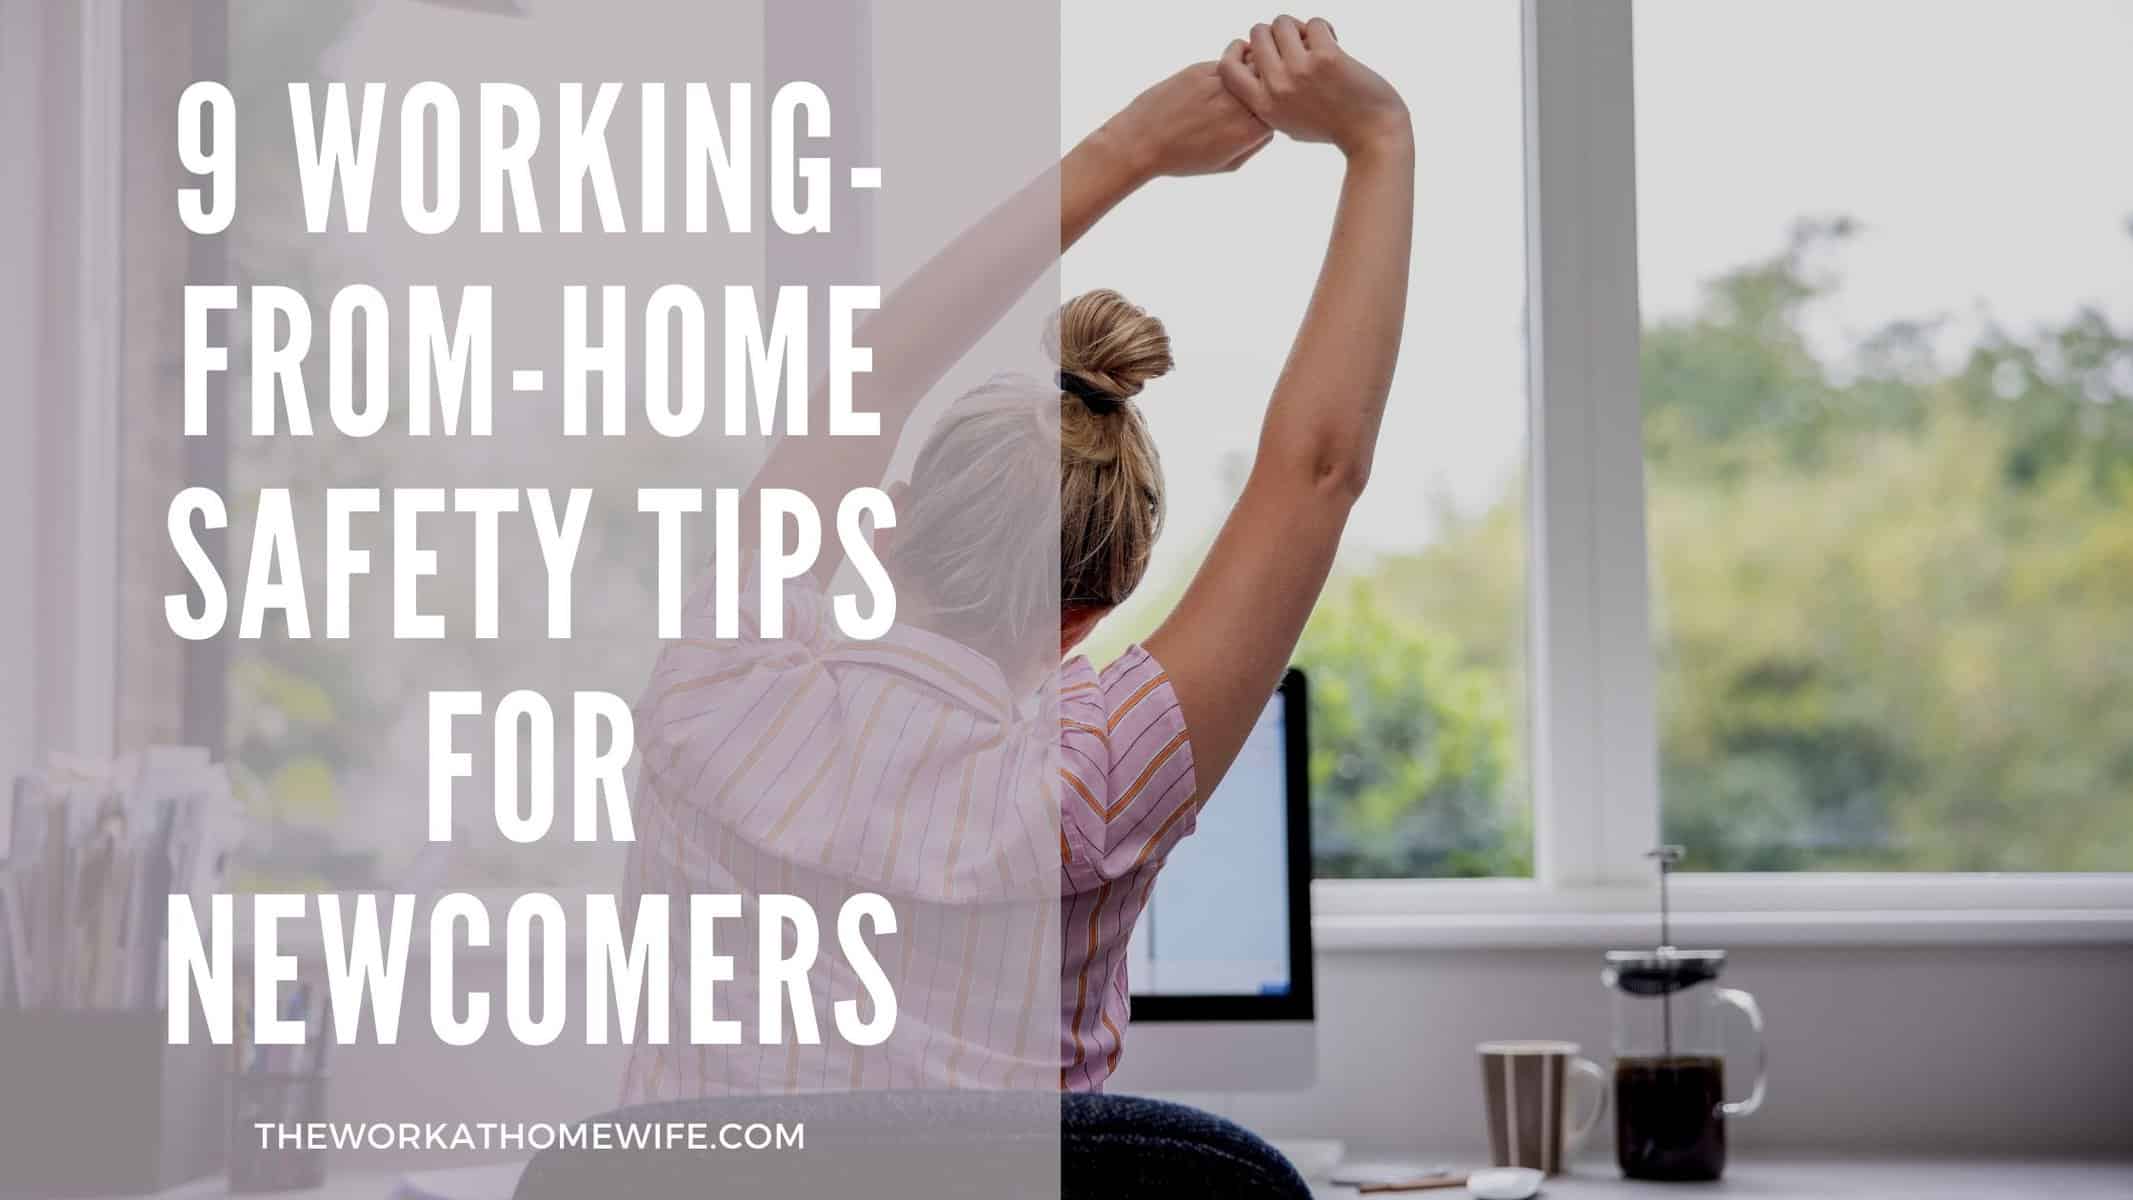 How to find safe work at home jobs